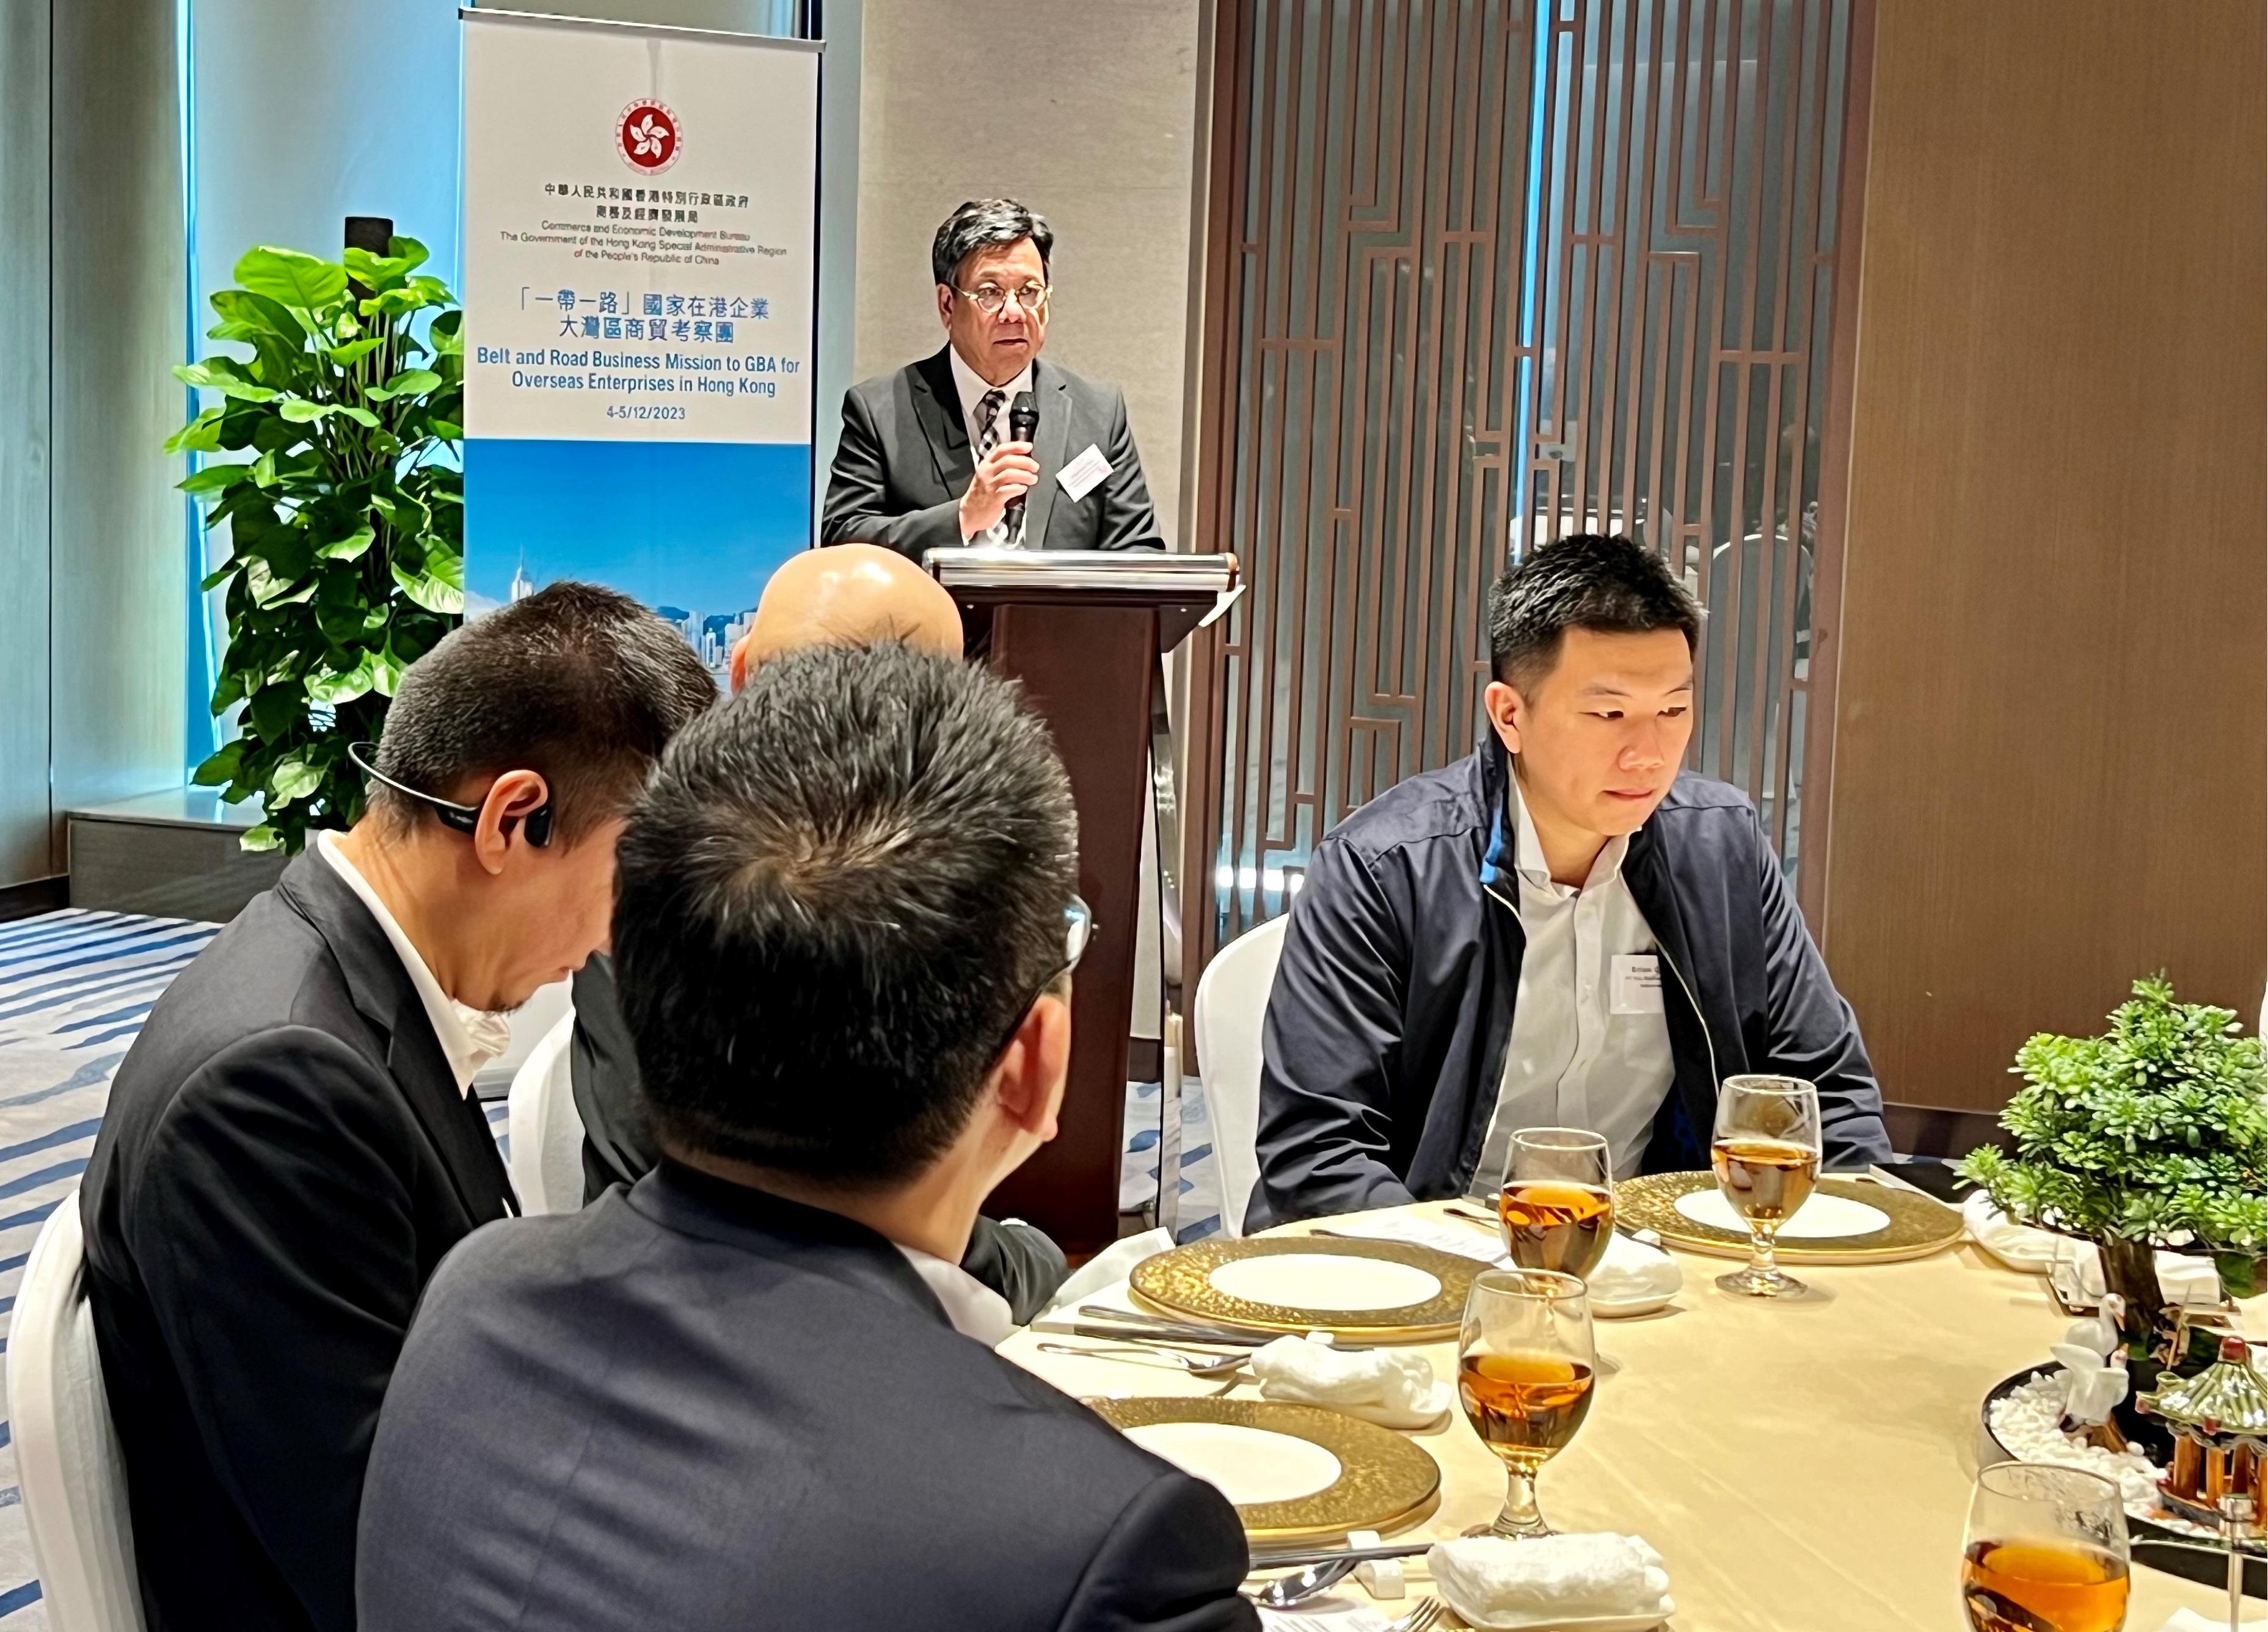 Led by the Secretary for Commerce and Economic Development, Mr Algernon Yau, a business delegation of enterprises of Belt and Road countries operating in Hong Kong today (December 4) began in Shenzhen a two-day visit to the Guangdong-Hong Kong-Macao Greater Bay Area. Photo shows Mr Yau (centre) speaking at a welcome luncheon for the delegation.